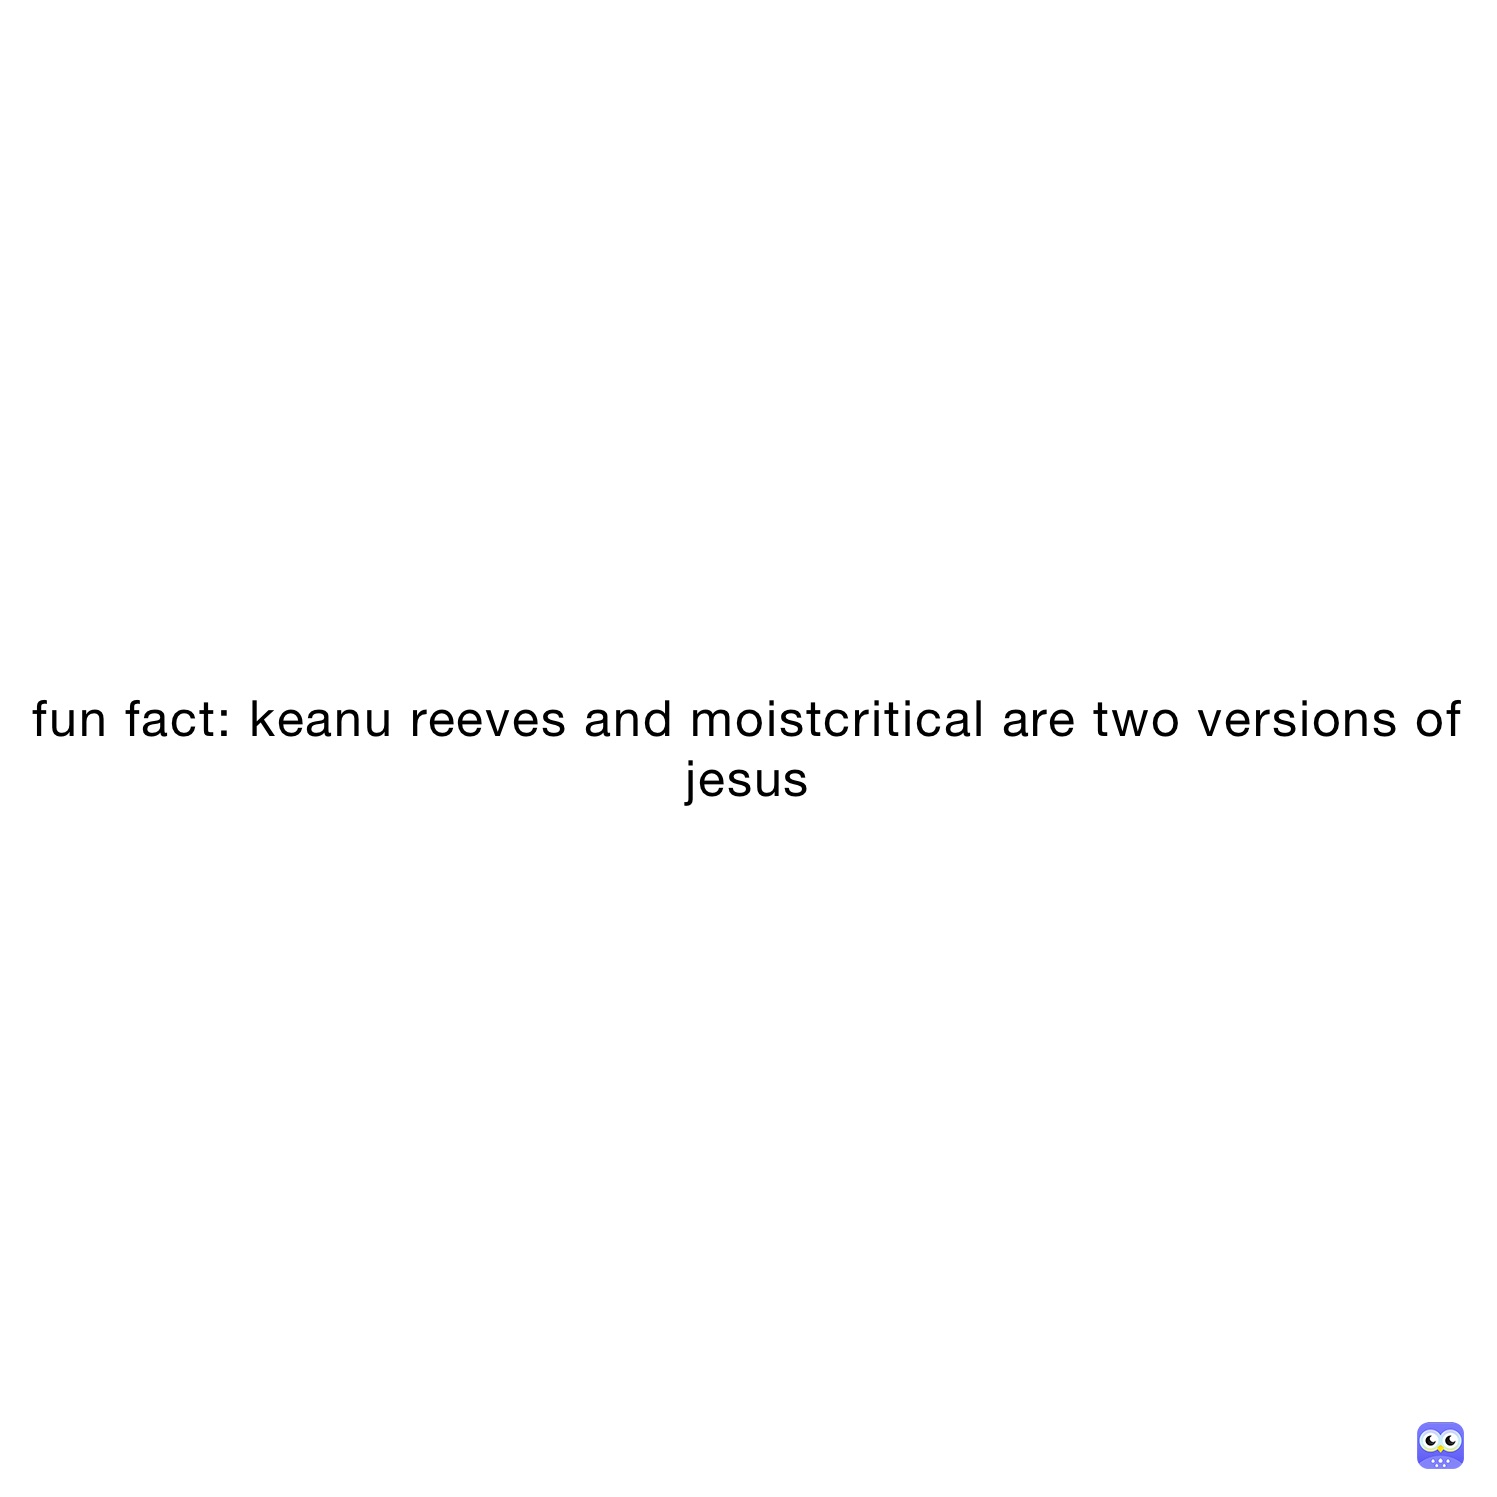 fun fact: keanu reeves and moistcritical are two versions of jesus